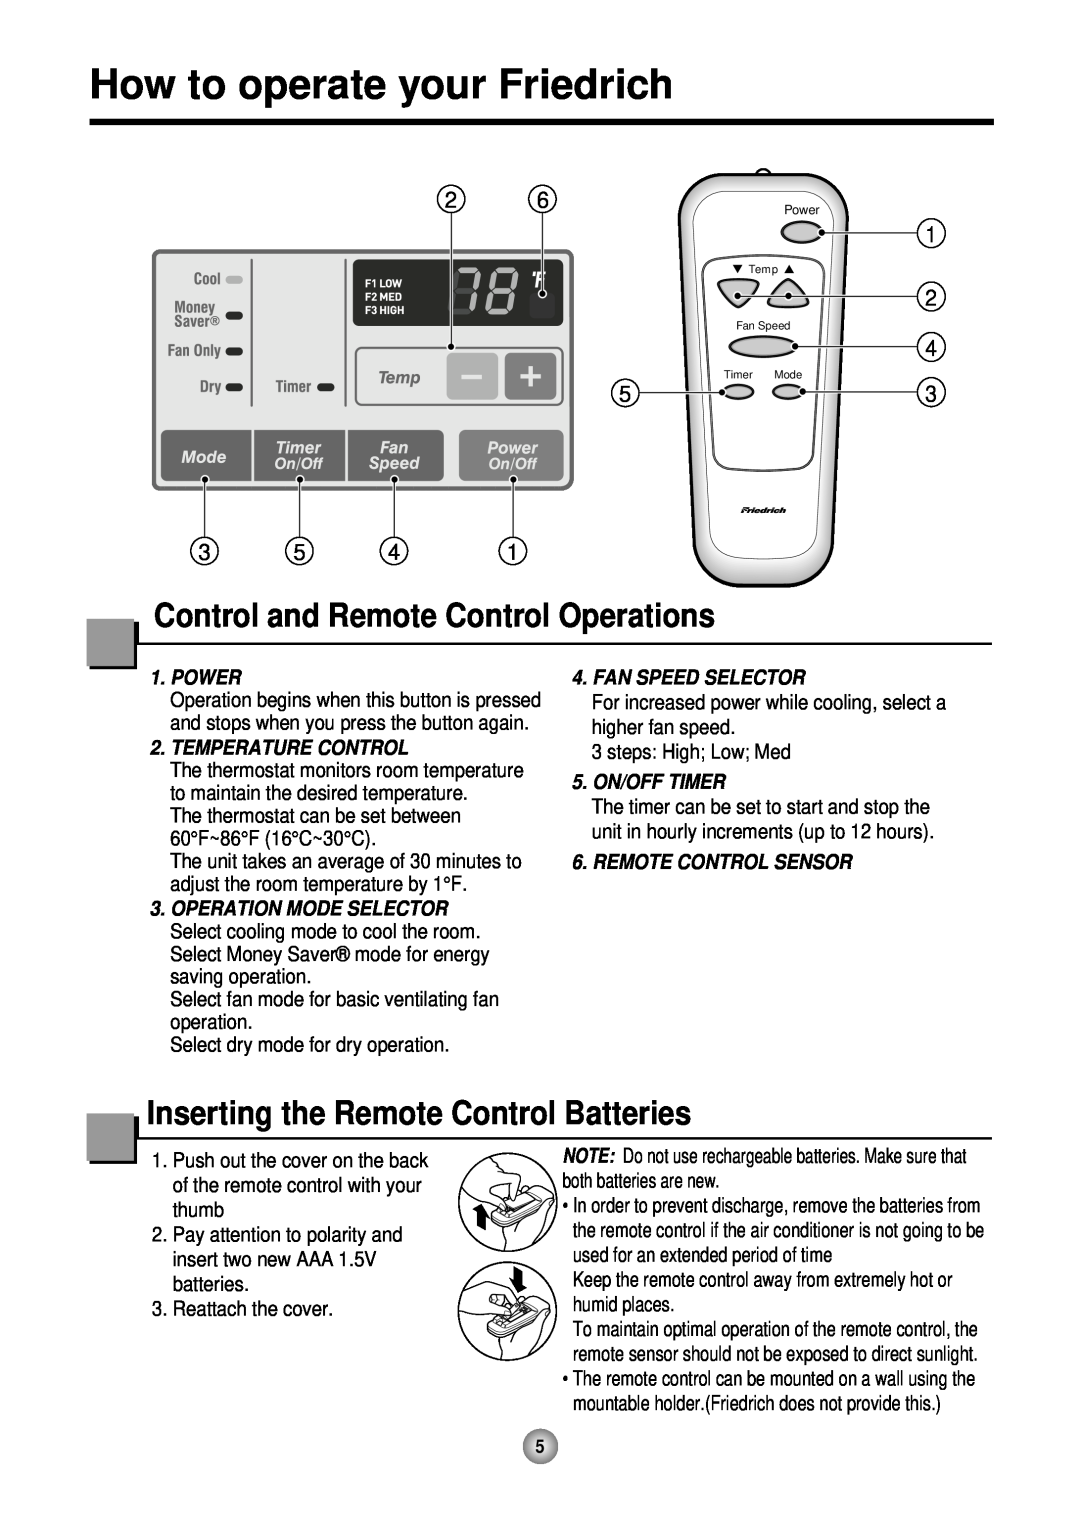 Friedrich CP10, CP12 How to operate your Friedrich, Control and Remote Control Operations, Power, Temperature Control 